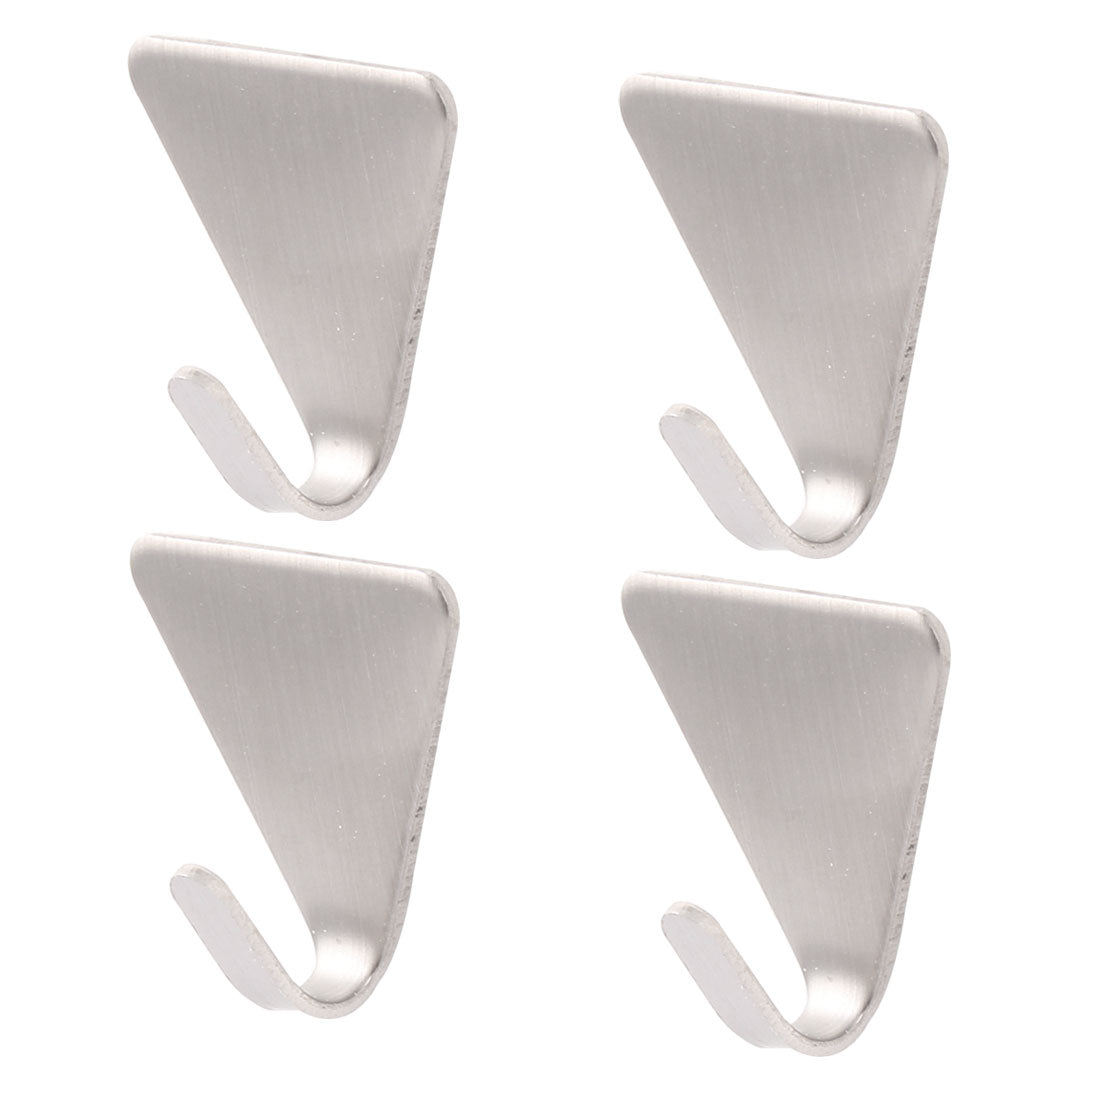 uxcell Uxcell Household Kitchen Stainless Steel Self Adhesive Towel Hanging Hanger Hook 4pcs